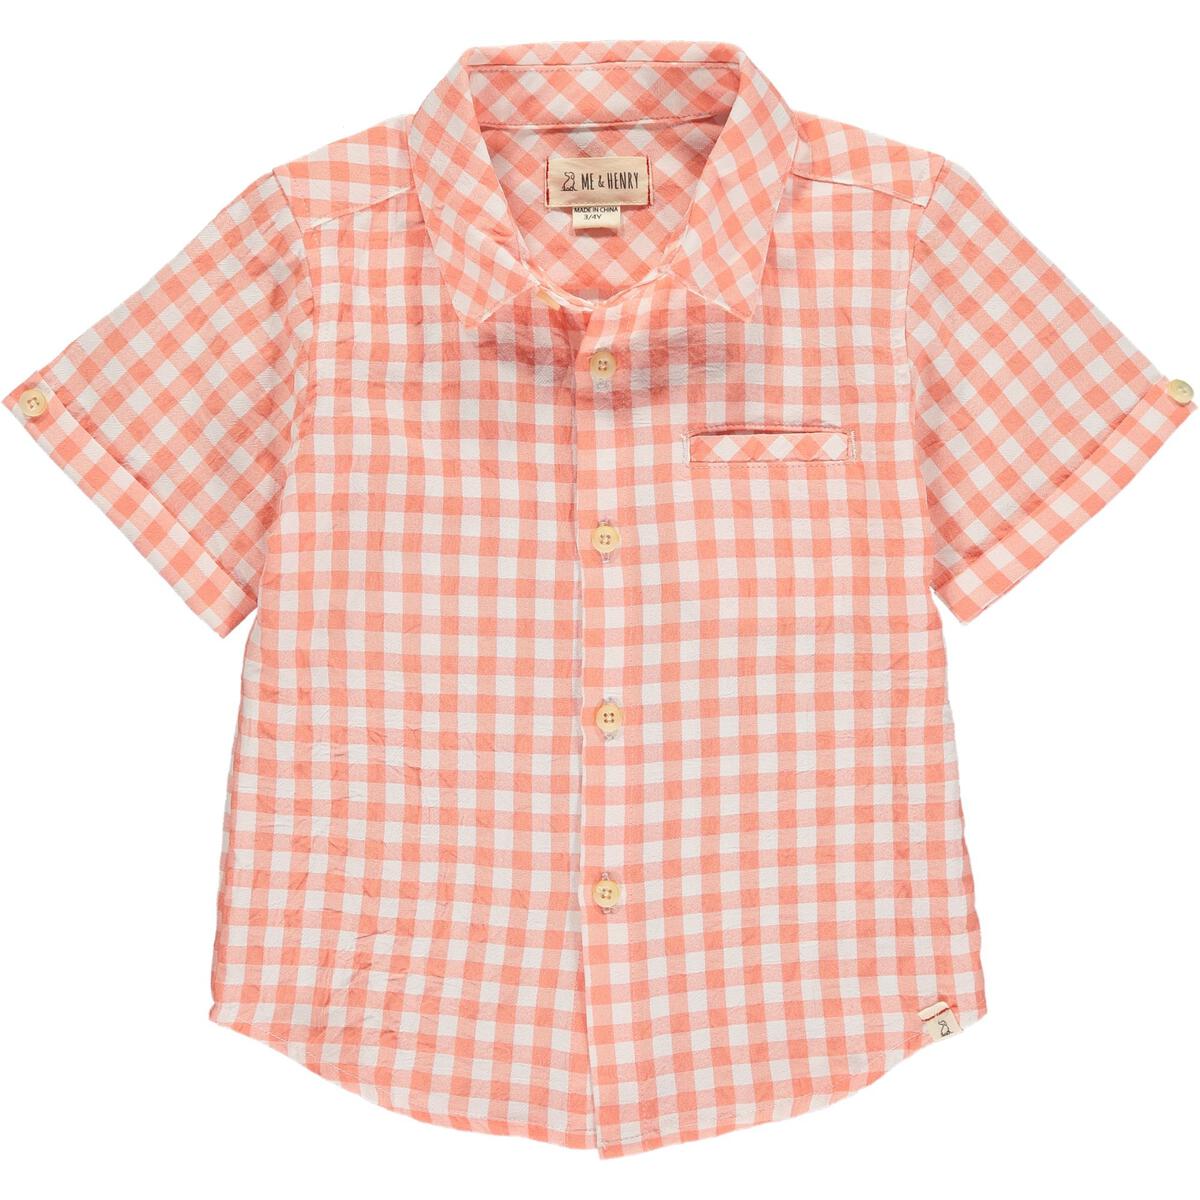 Apricot Plaid Penzance Rolled Sleeve Shirt - Twinkle Twinkle Little One